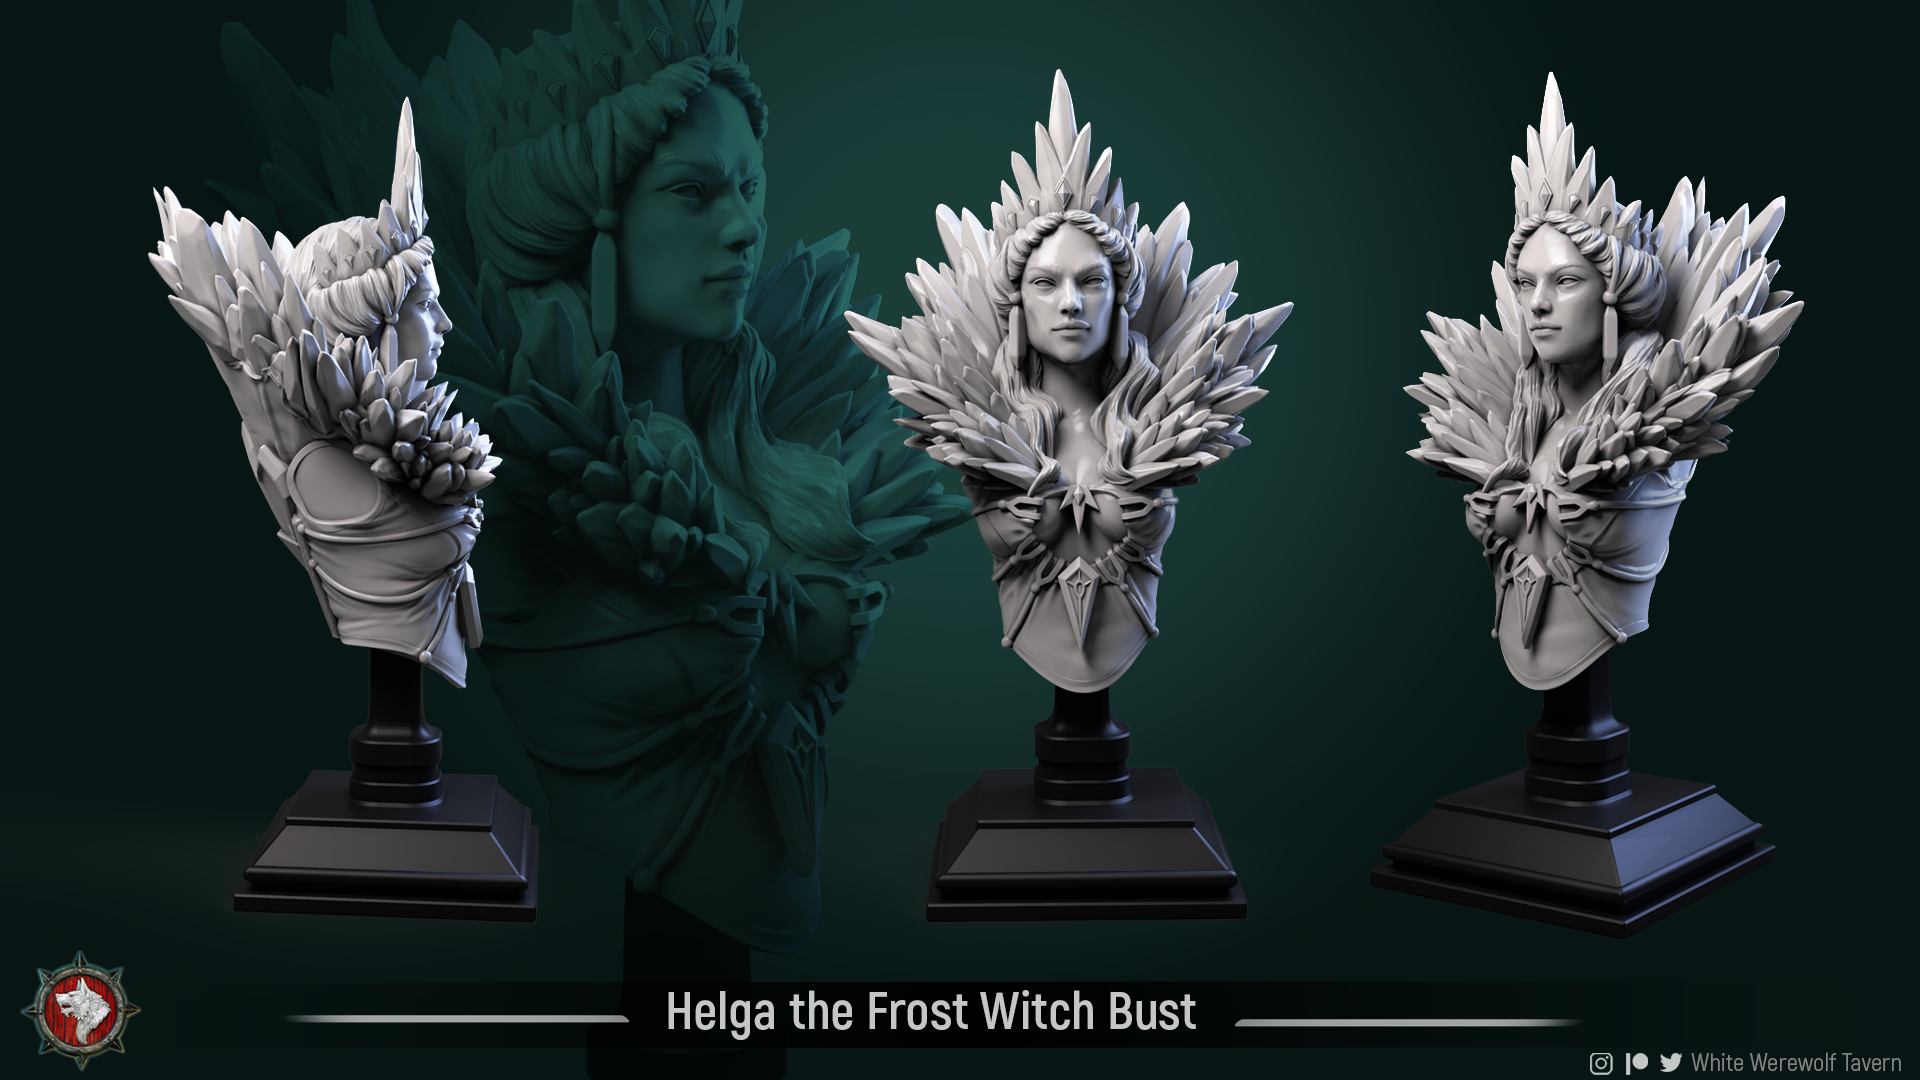 Helga the Frost Witch Bust